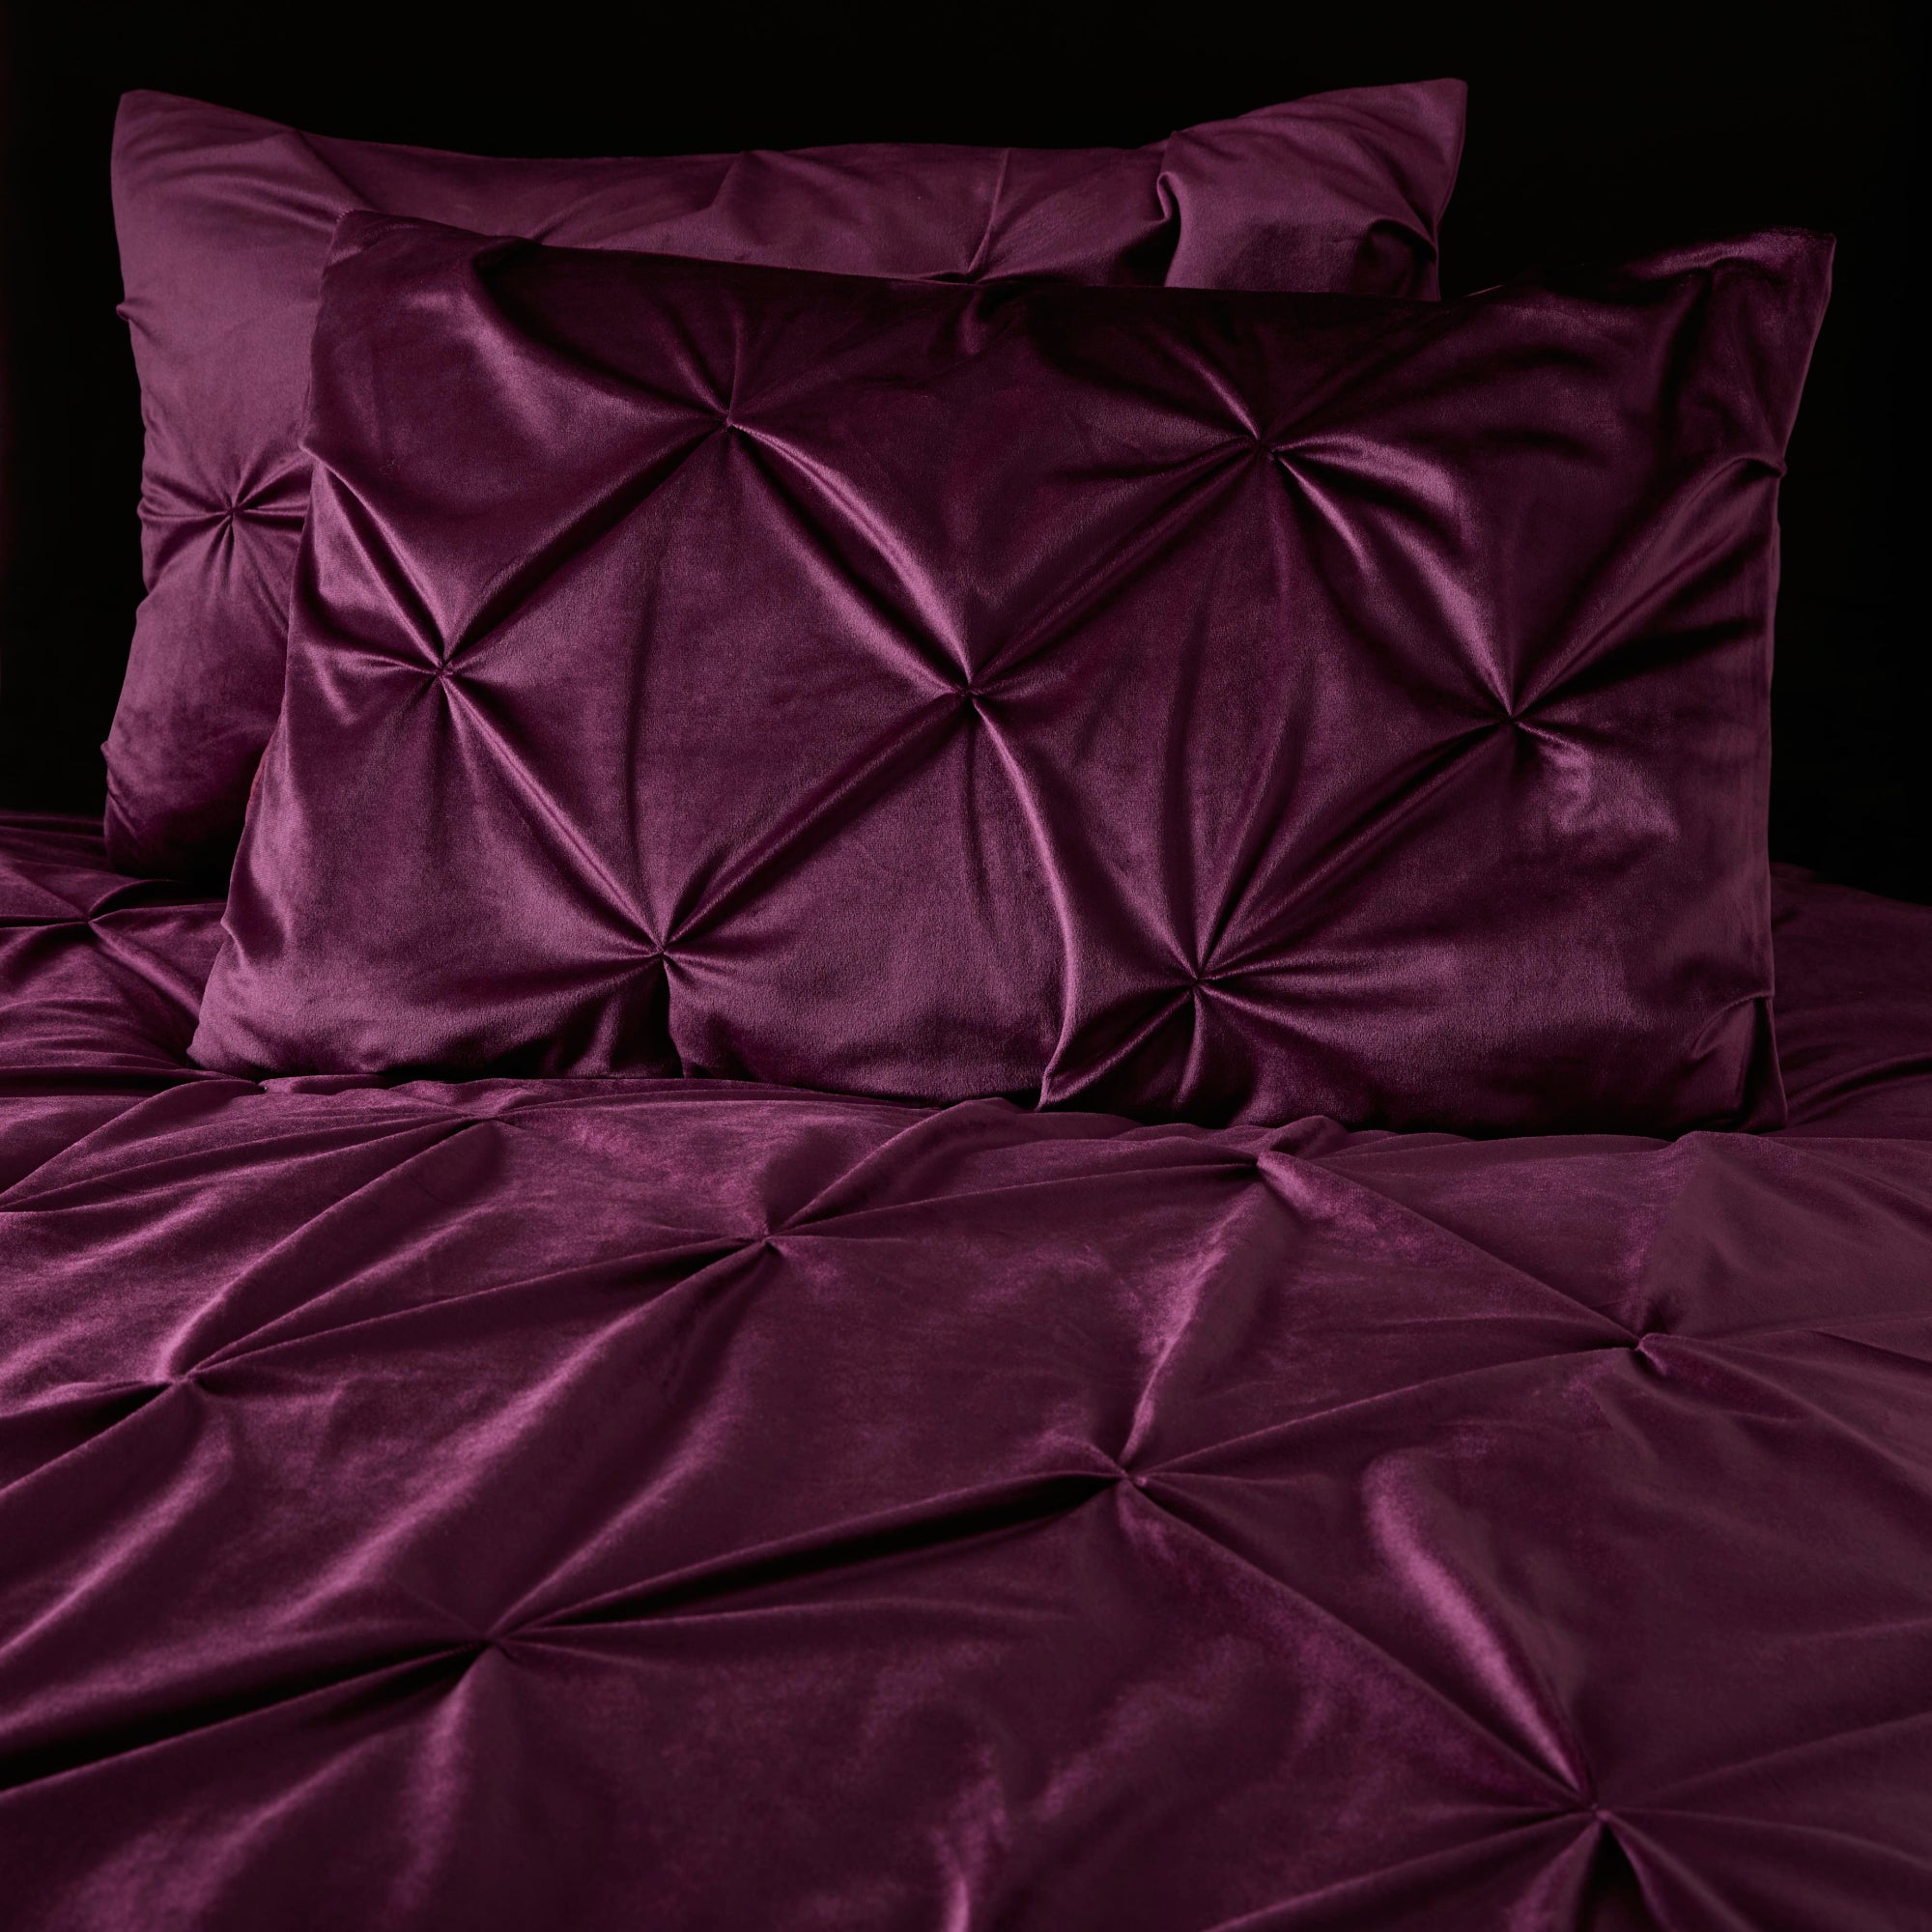 Duvet Cover Set Mira by Soiree in Damson